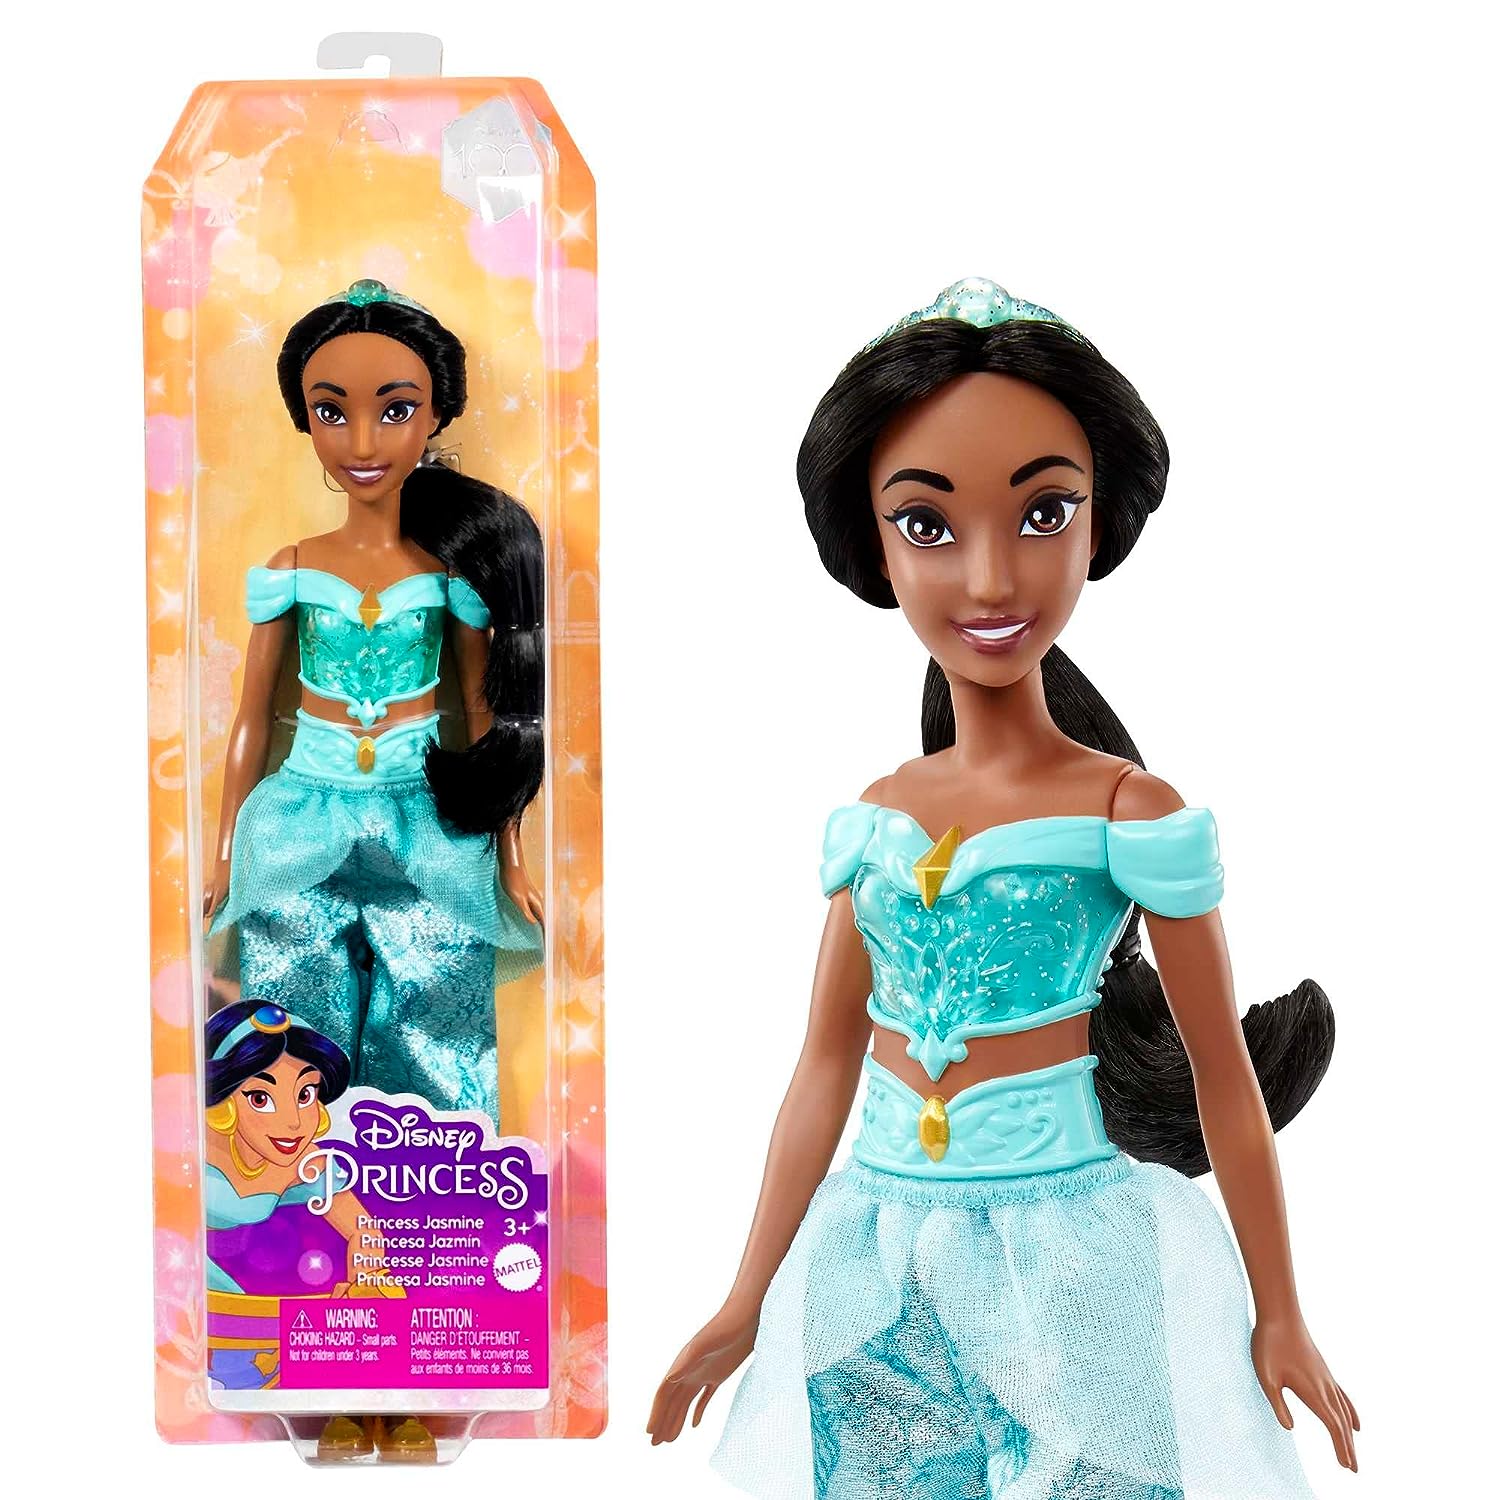 Disney Princess Jasmine Posable Fashion Doll with Sparkling Clothing and Accessories for Kids Ages 3+